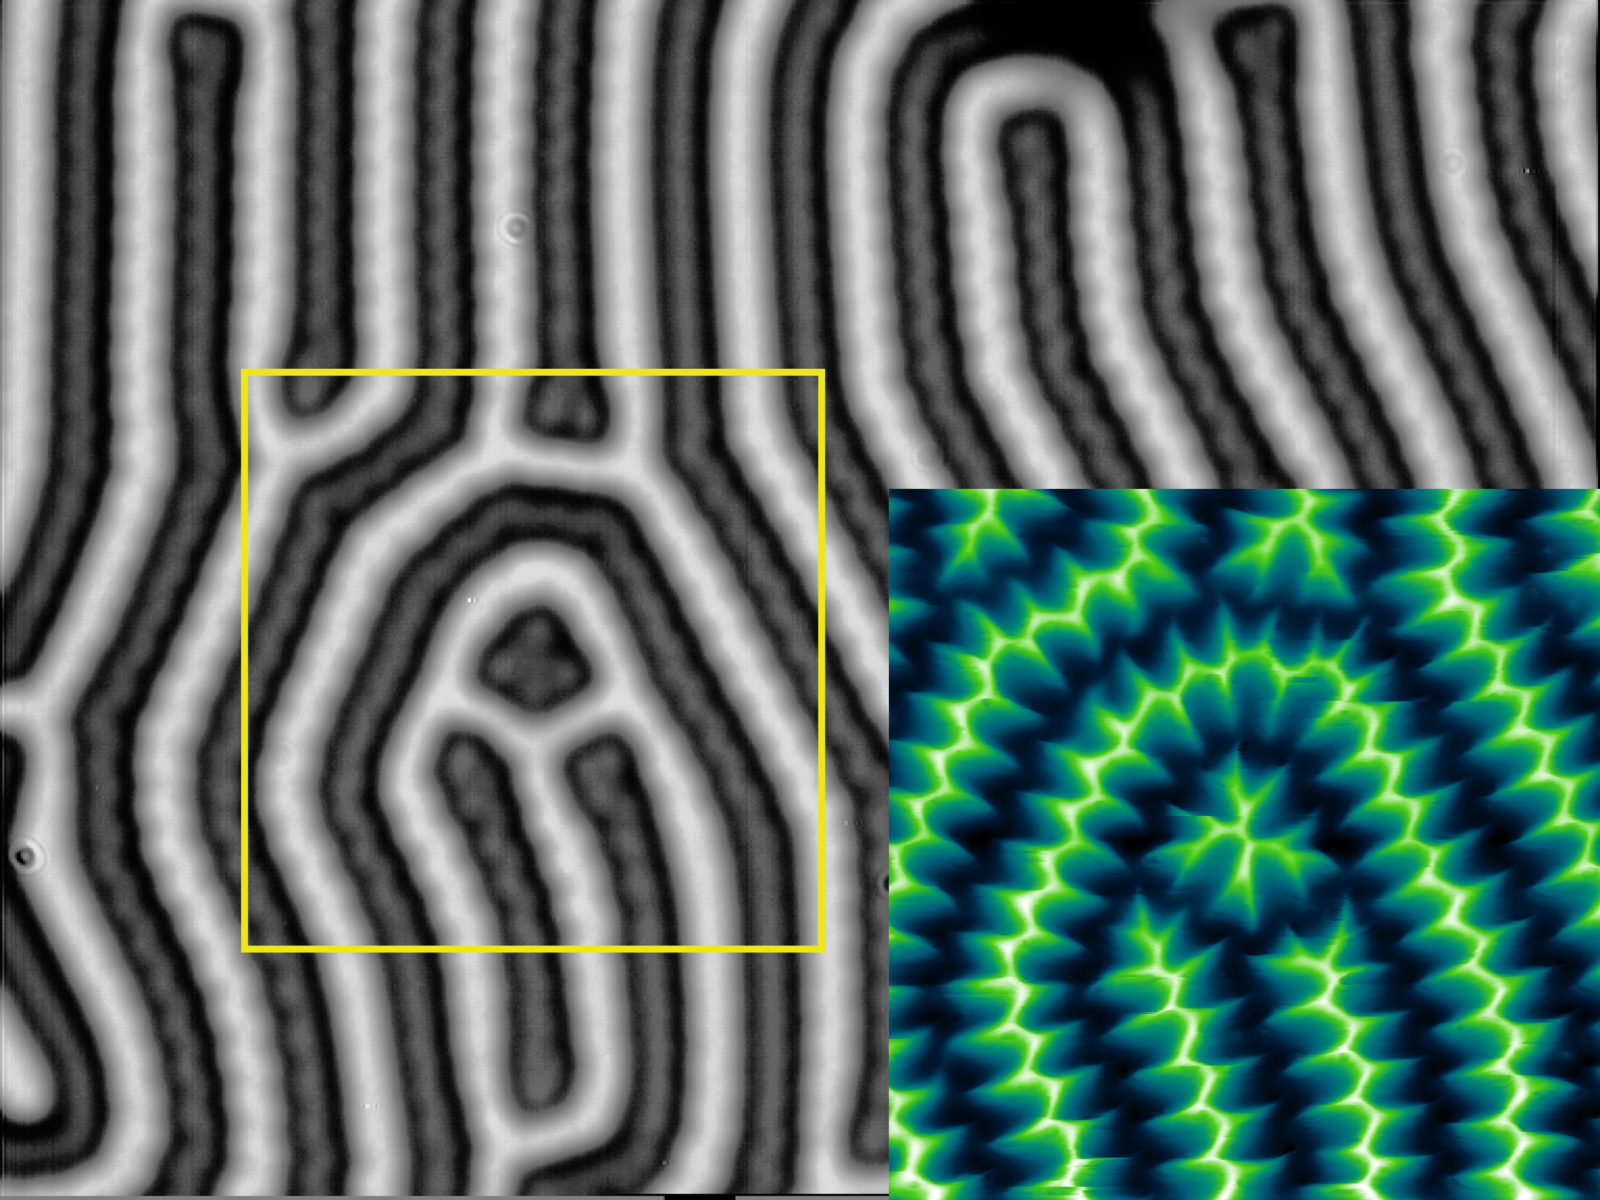 Two methods of imaging the magnetic domain structures: polarizing optical microscopy — Faraday effect and magnetic force microscopy (MFM)